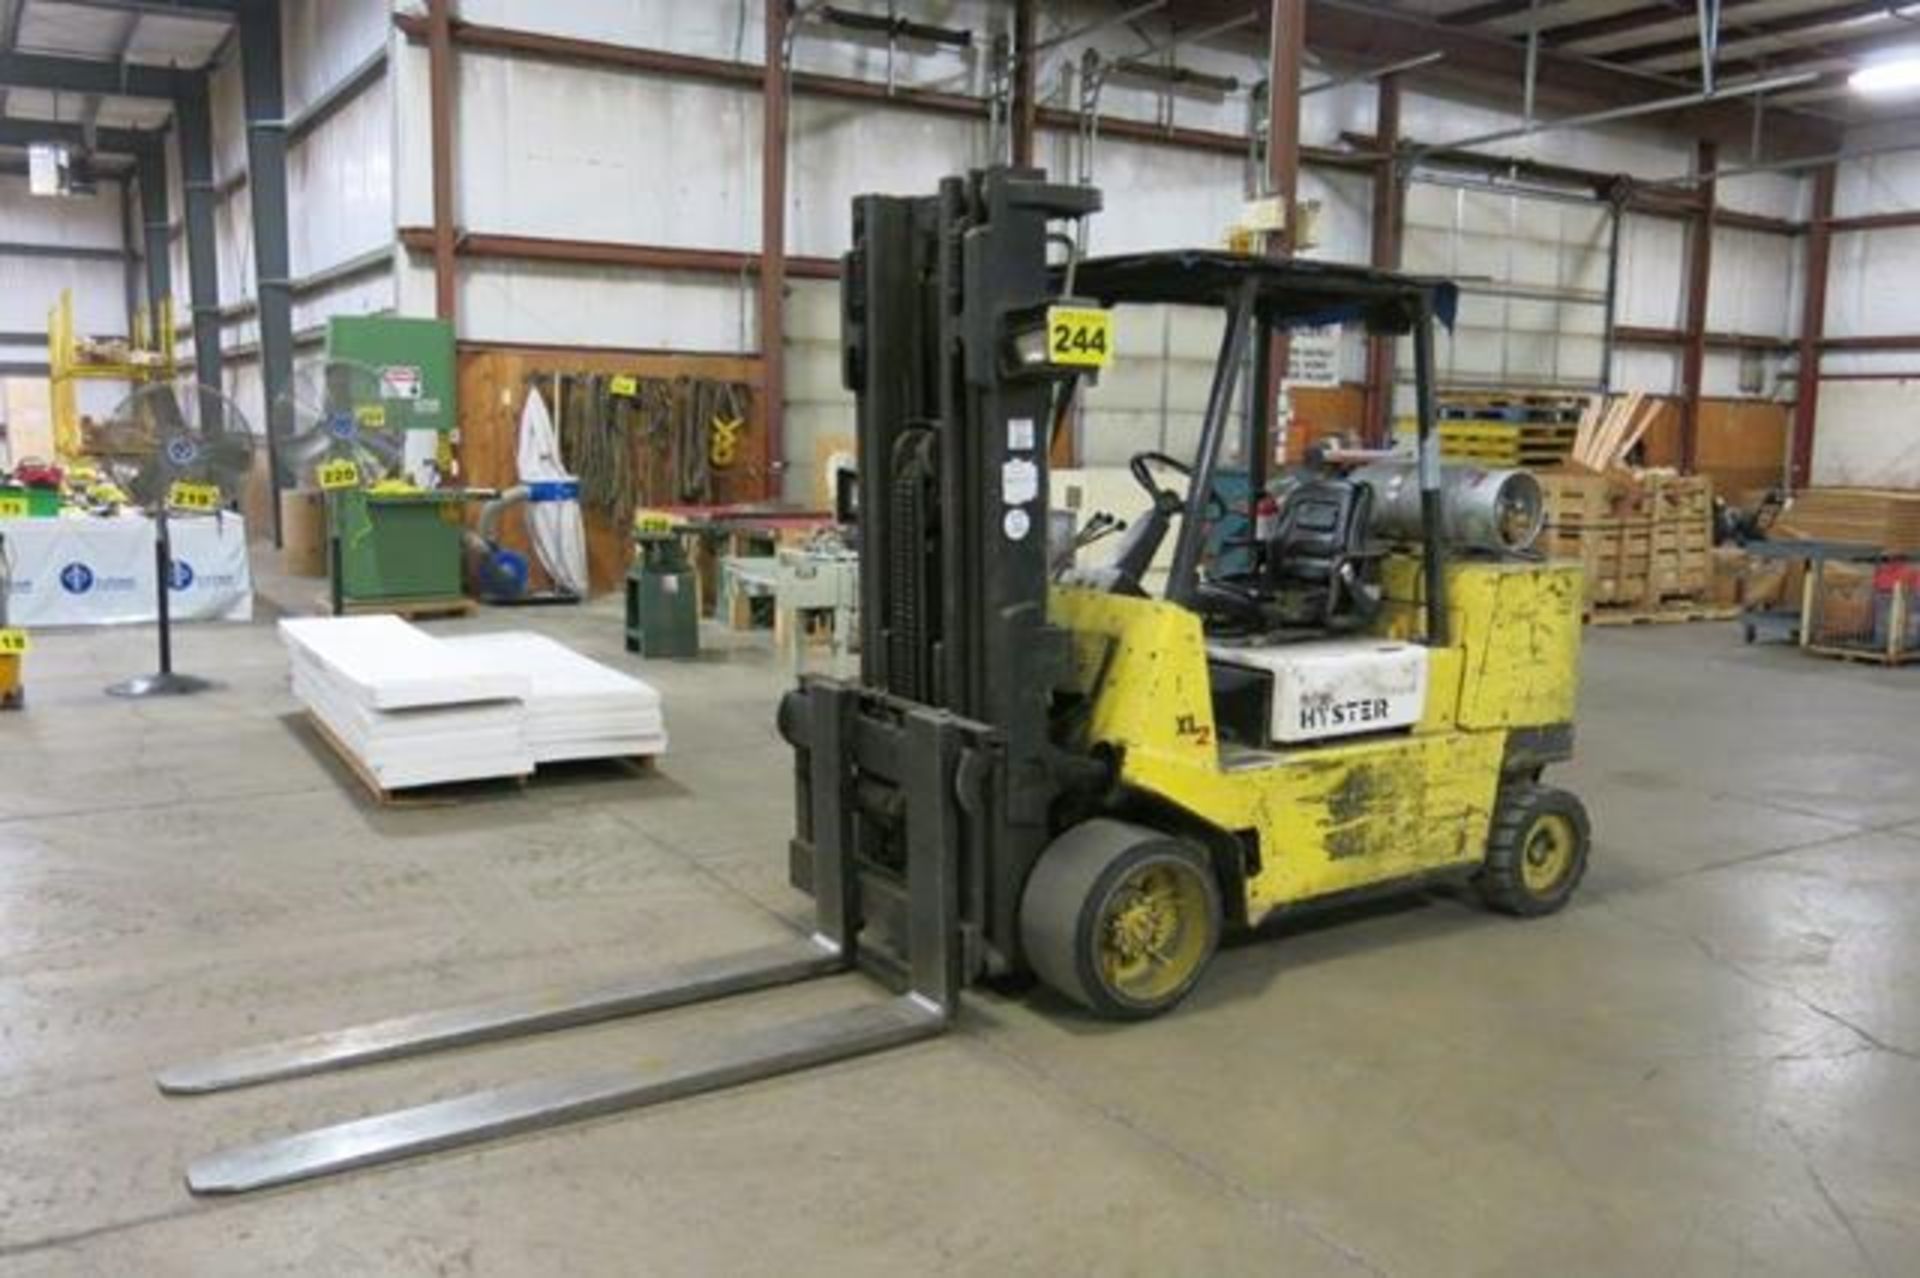 HYSTER, S120XLS, 11,000 LBS, 3 STAGE, LPG FORKLIFT, SIDESHIFT, 206.5" MAXIMUM LIFT 2,446 HOURS, S/